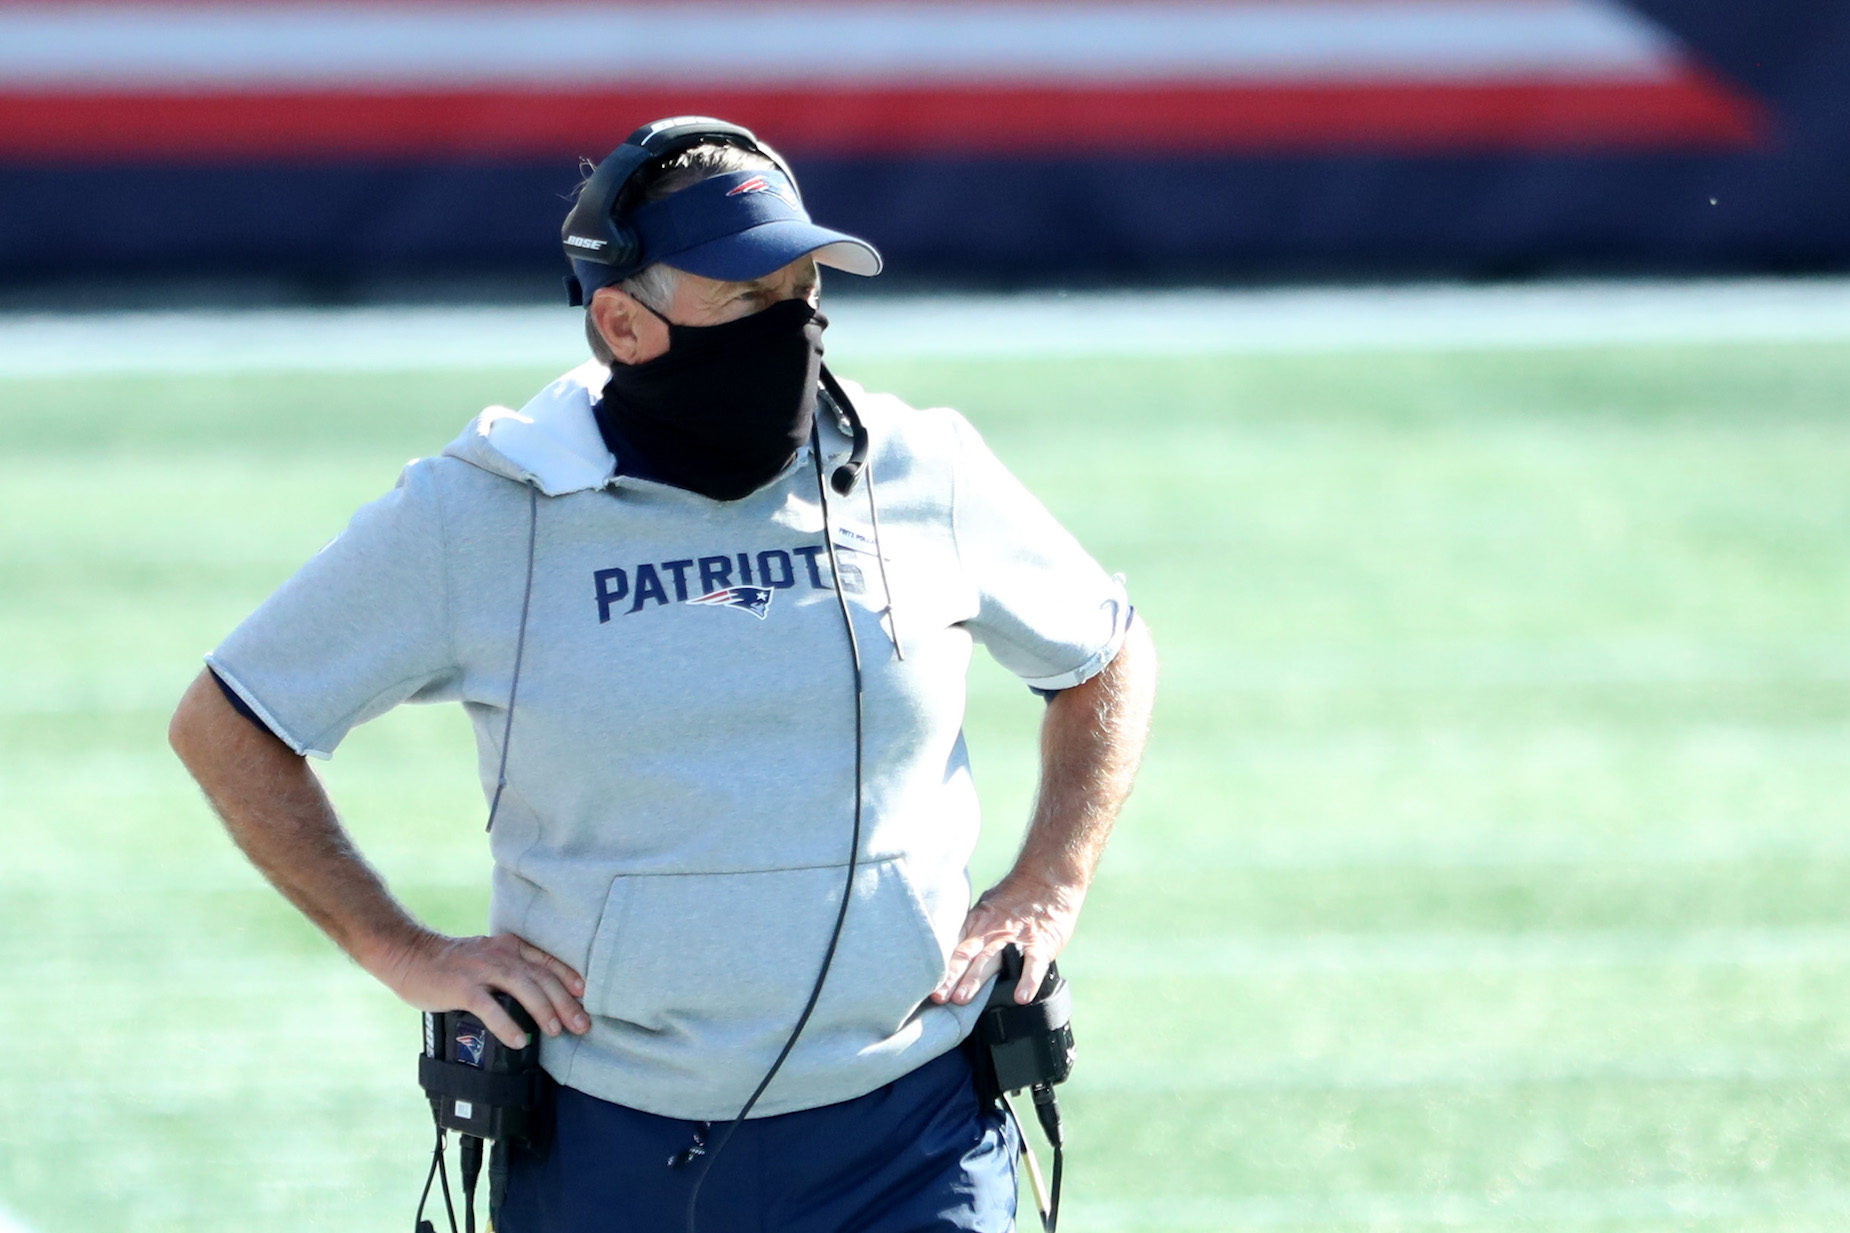 Bill Belichick earns millions from the New England Patriots but hasn't exactly lived up to that salary this season.